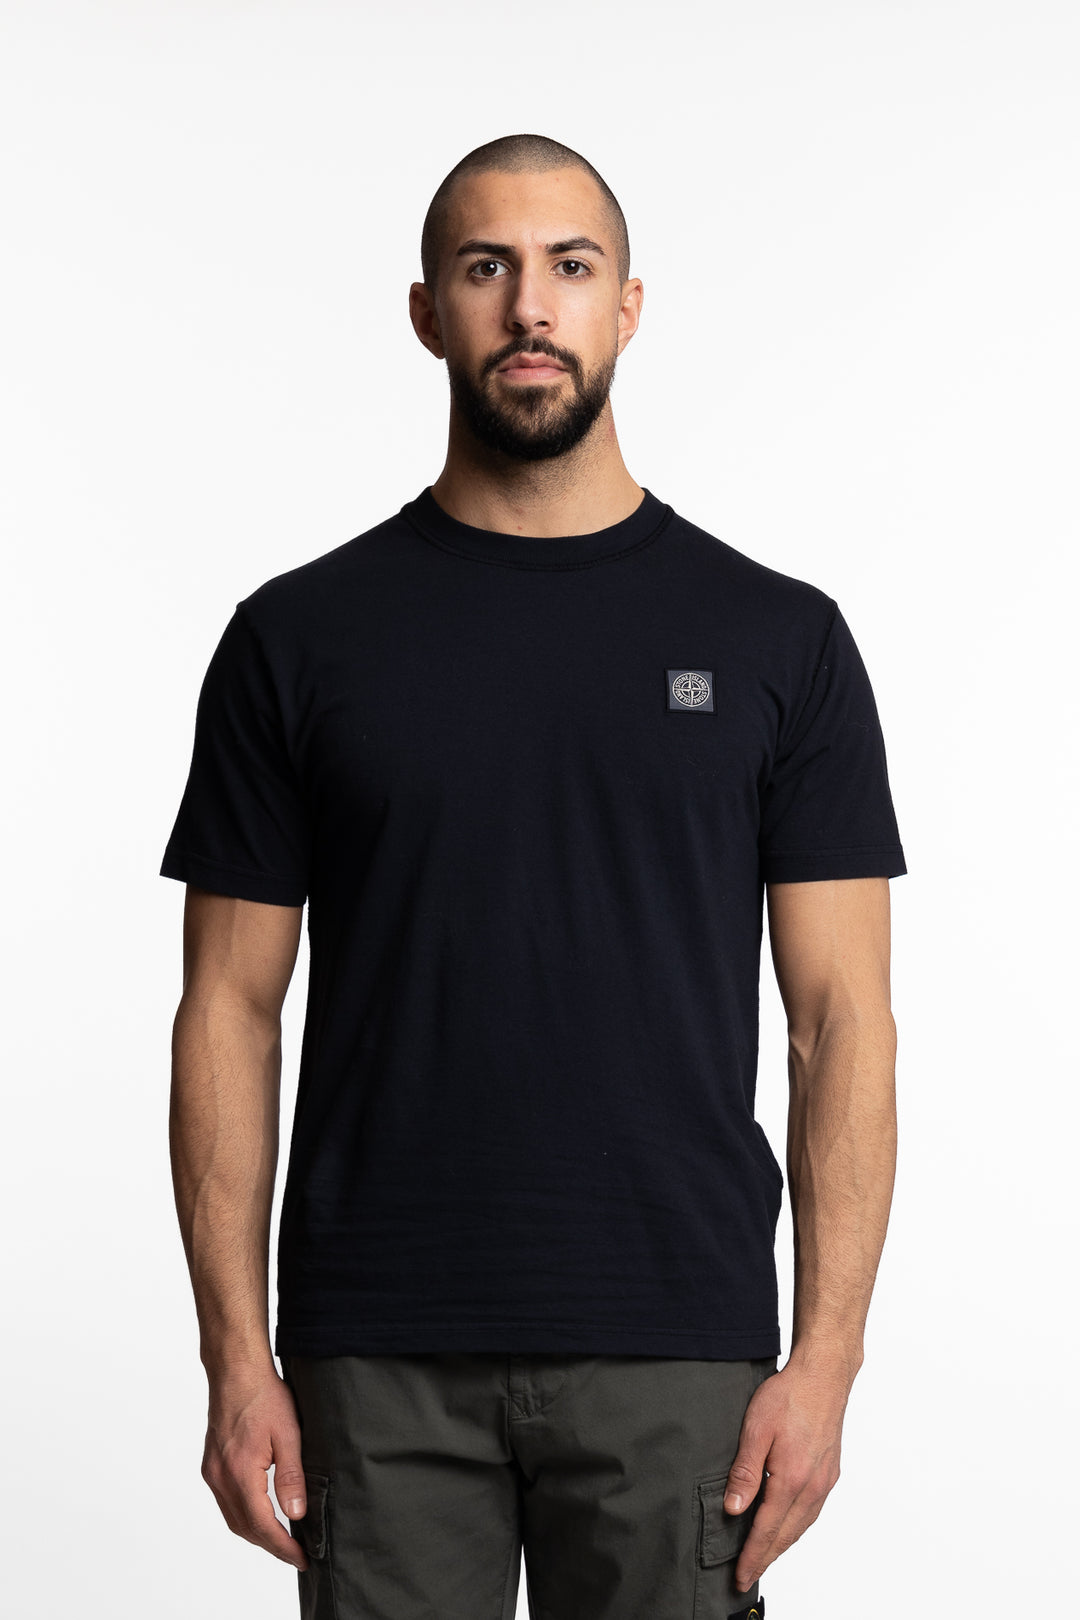 T-Shirt 'OLD' Effect Navy